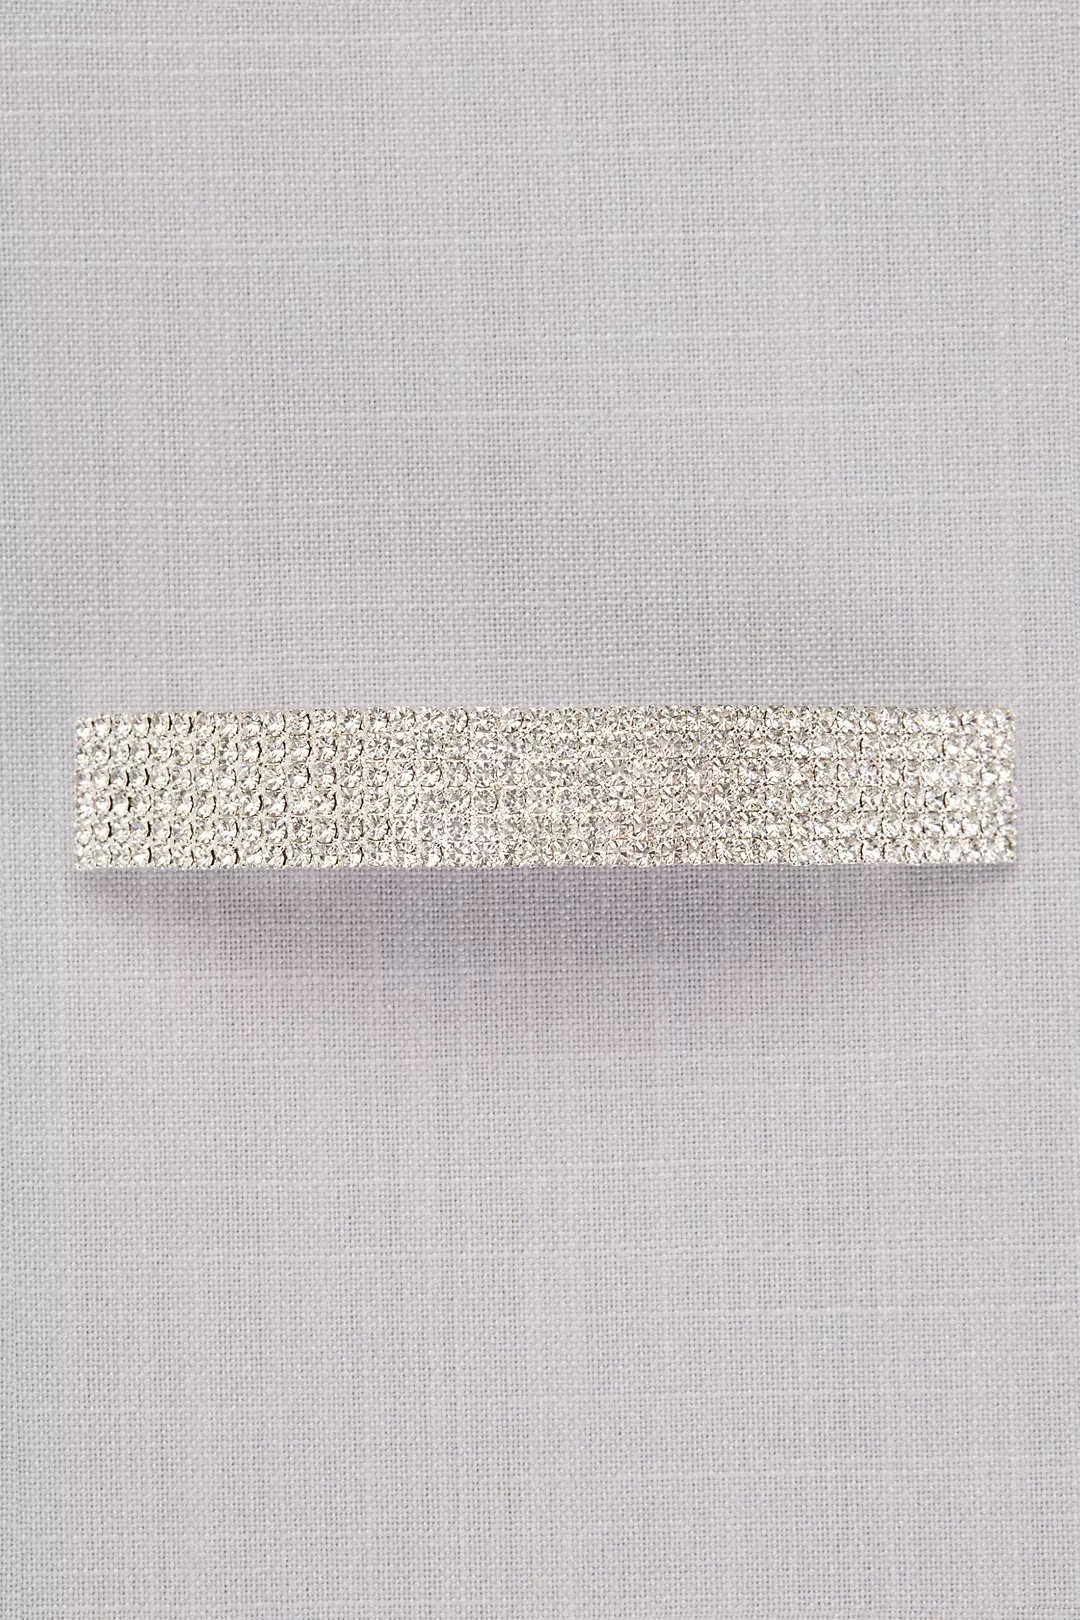 Crystal Rows Barrette  Image